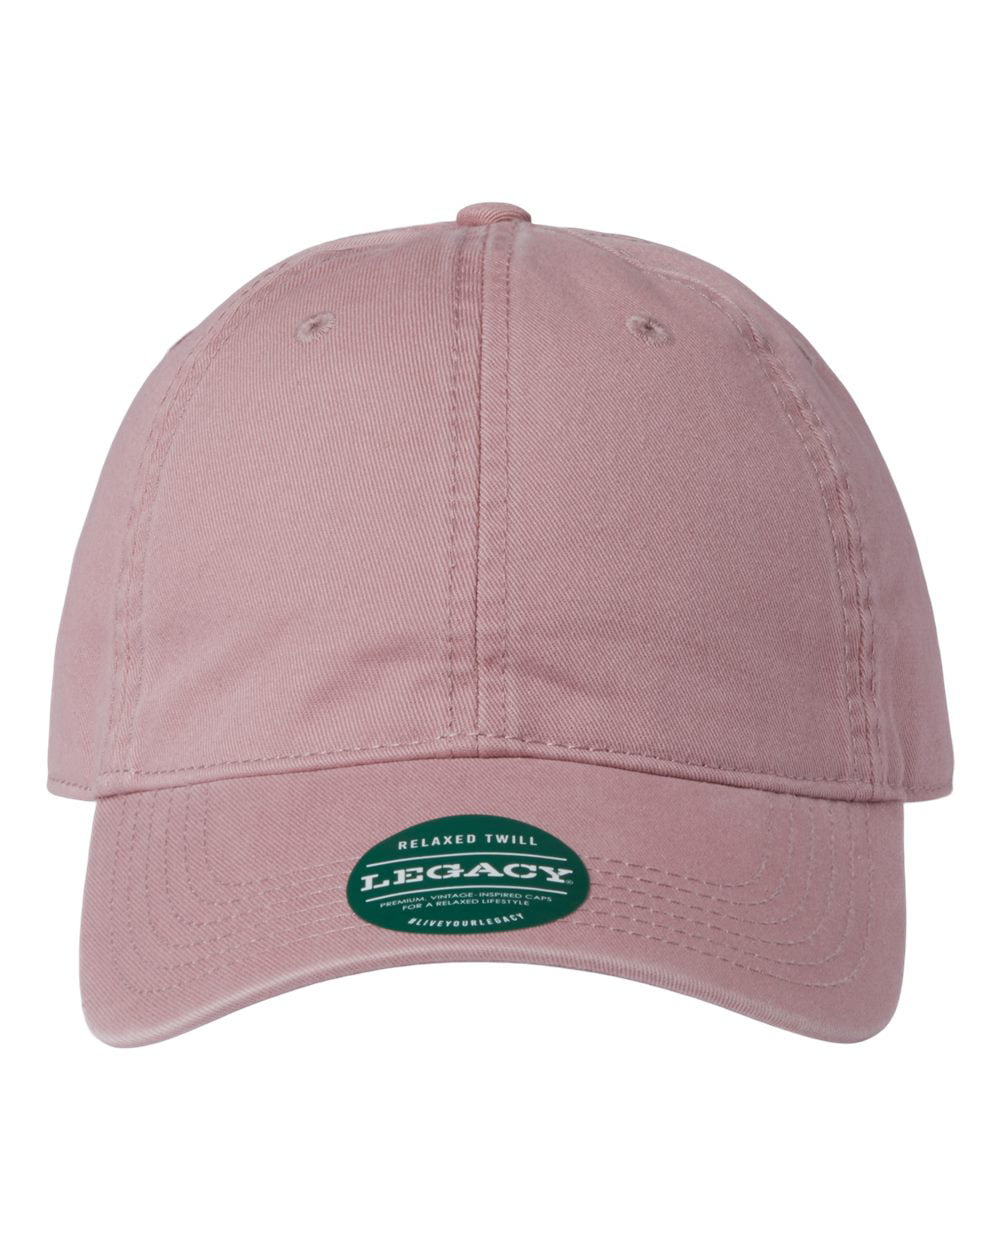 LEGACY - Relaxed Twill Dad Hat - EZA - Dusty Rose - Size: Adjustable ...